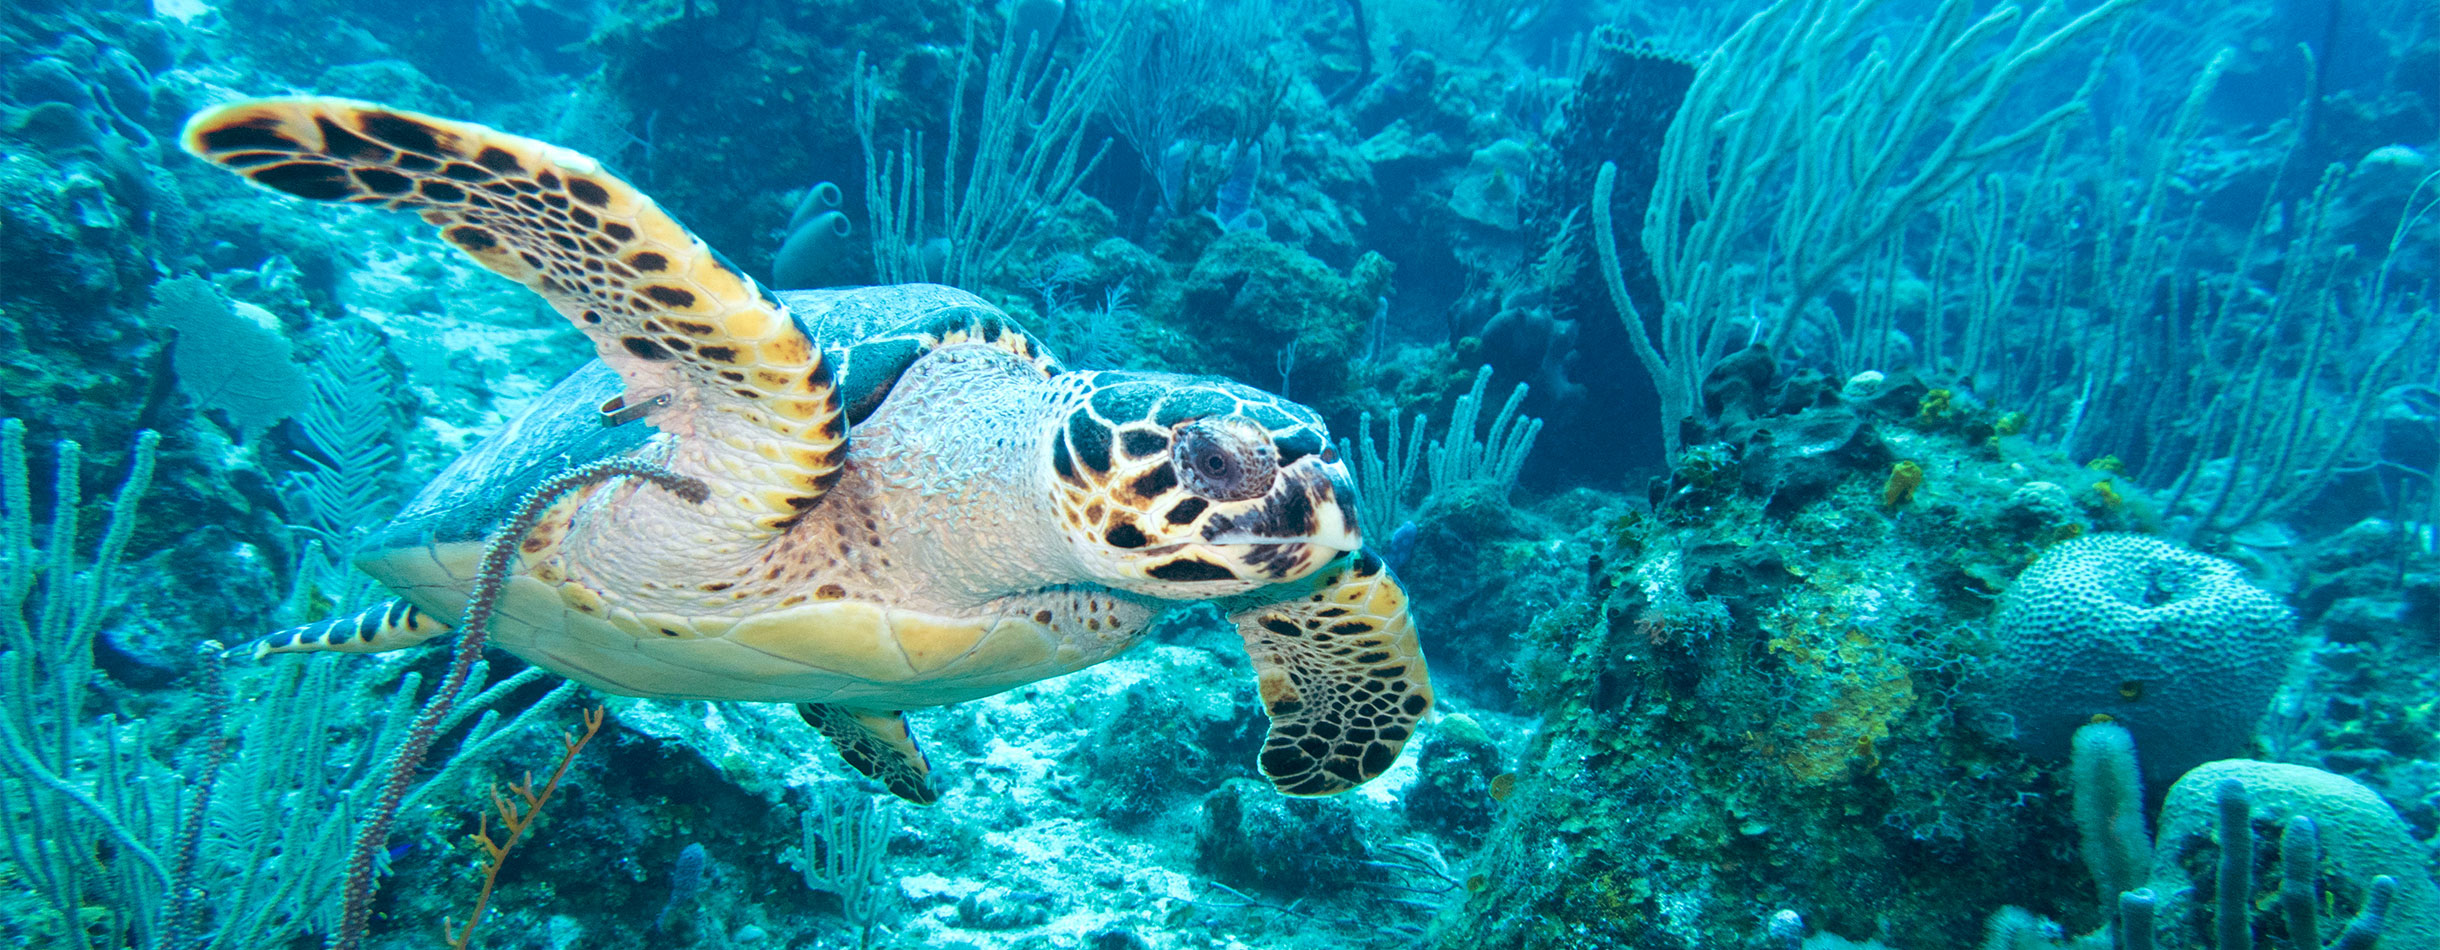 Turtle swimming in the reef